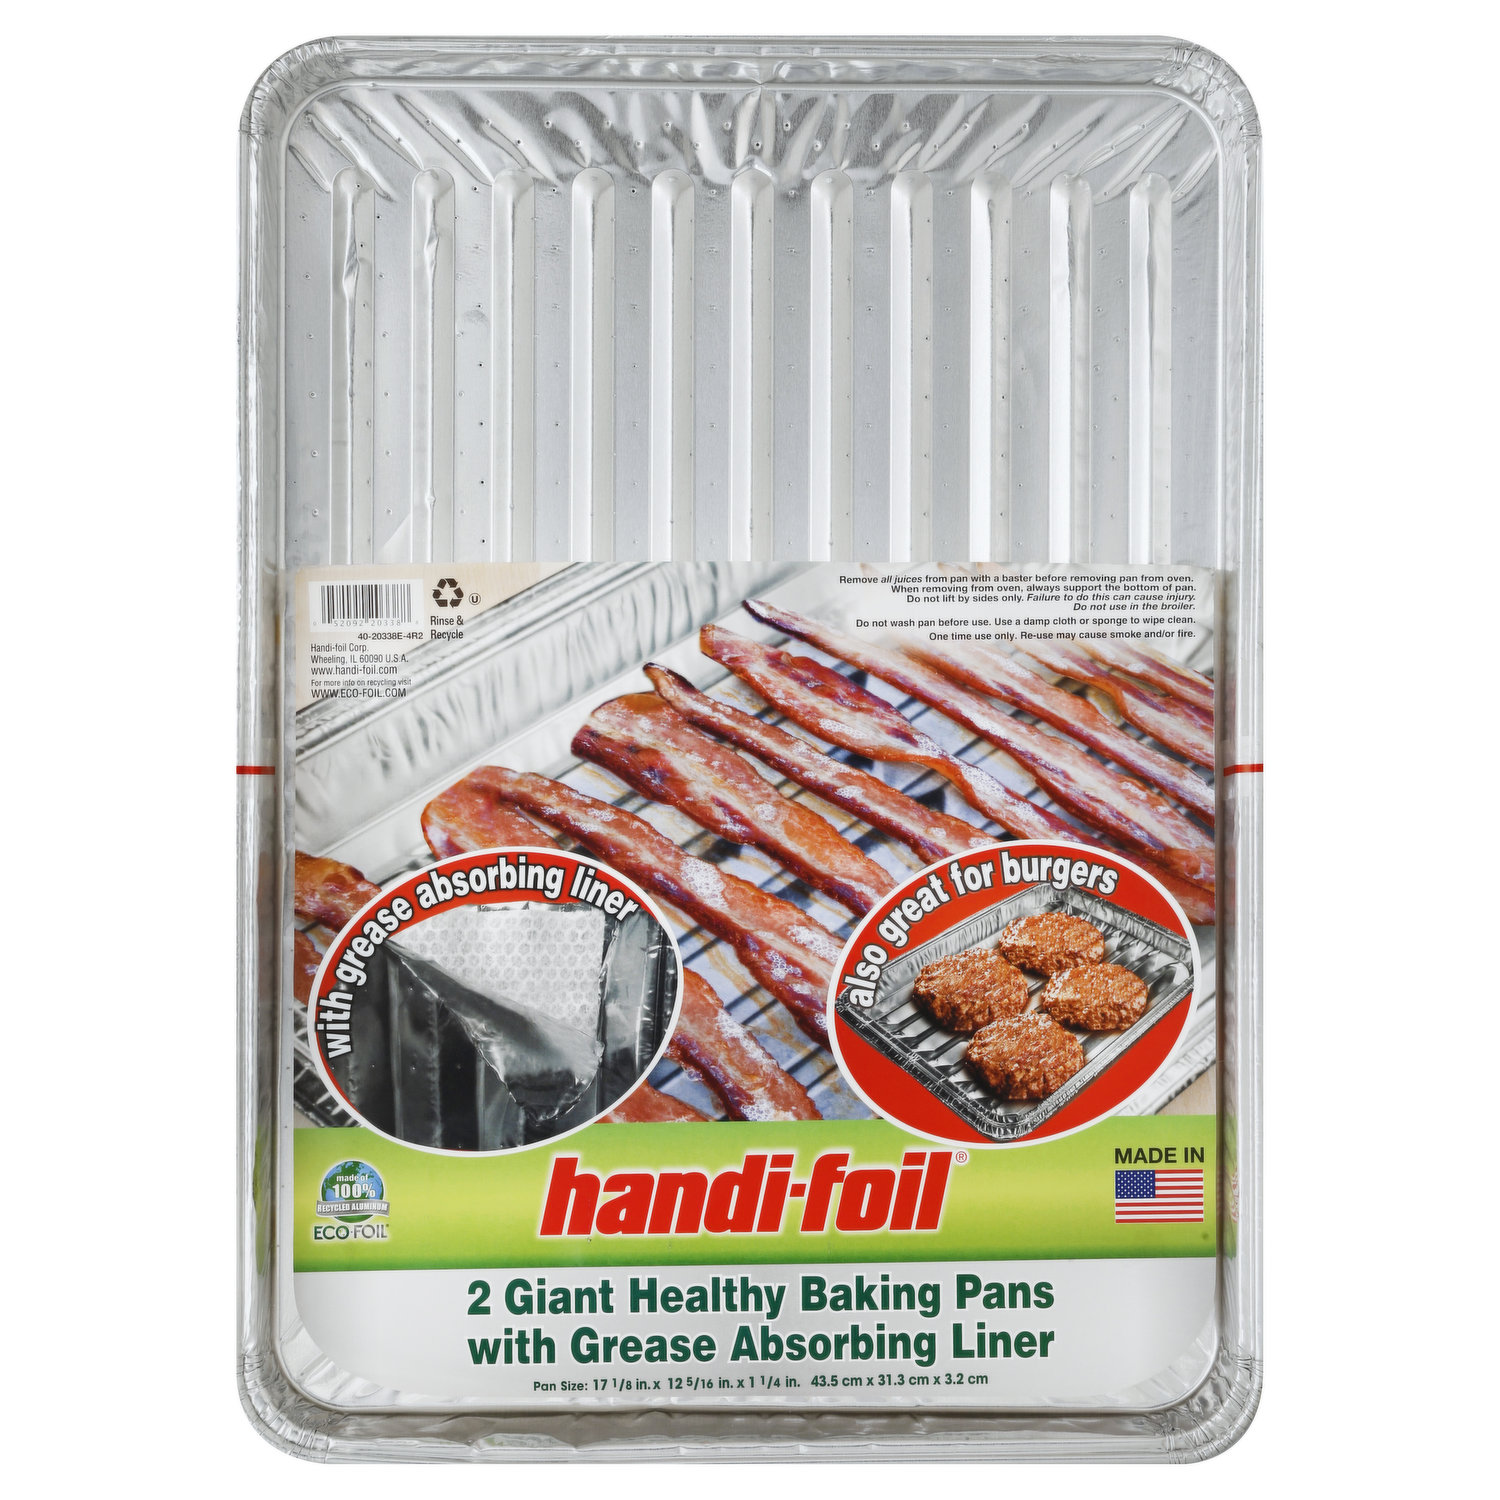 Handi-Foil Pans, with Grease Absorbing Liner, Healthy Roaster, Baker